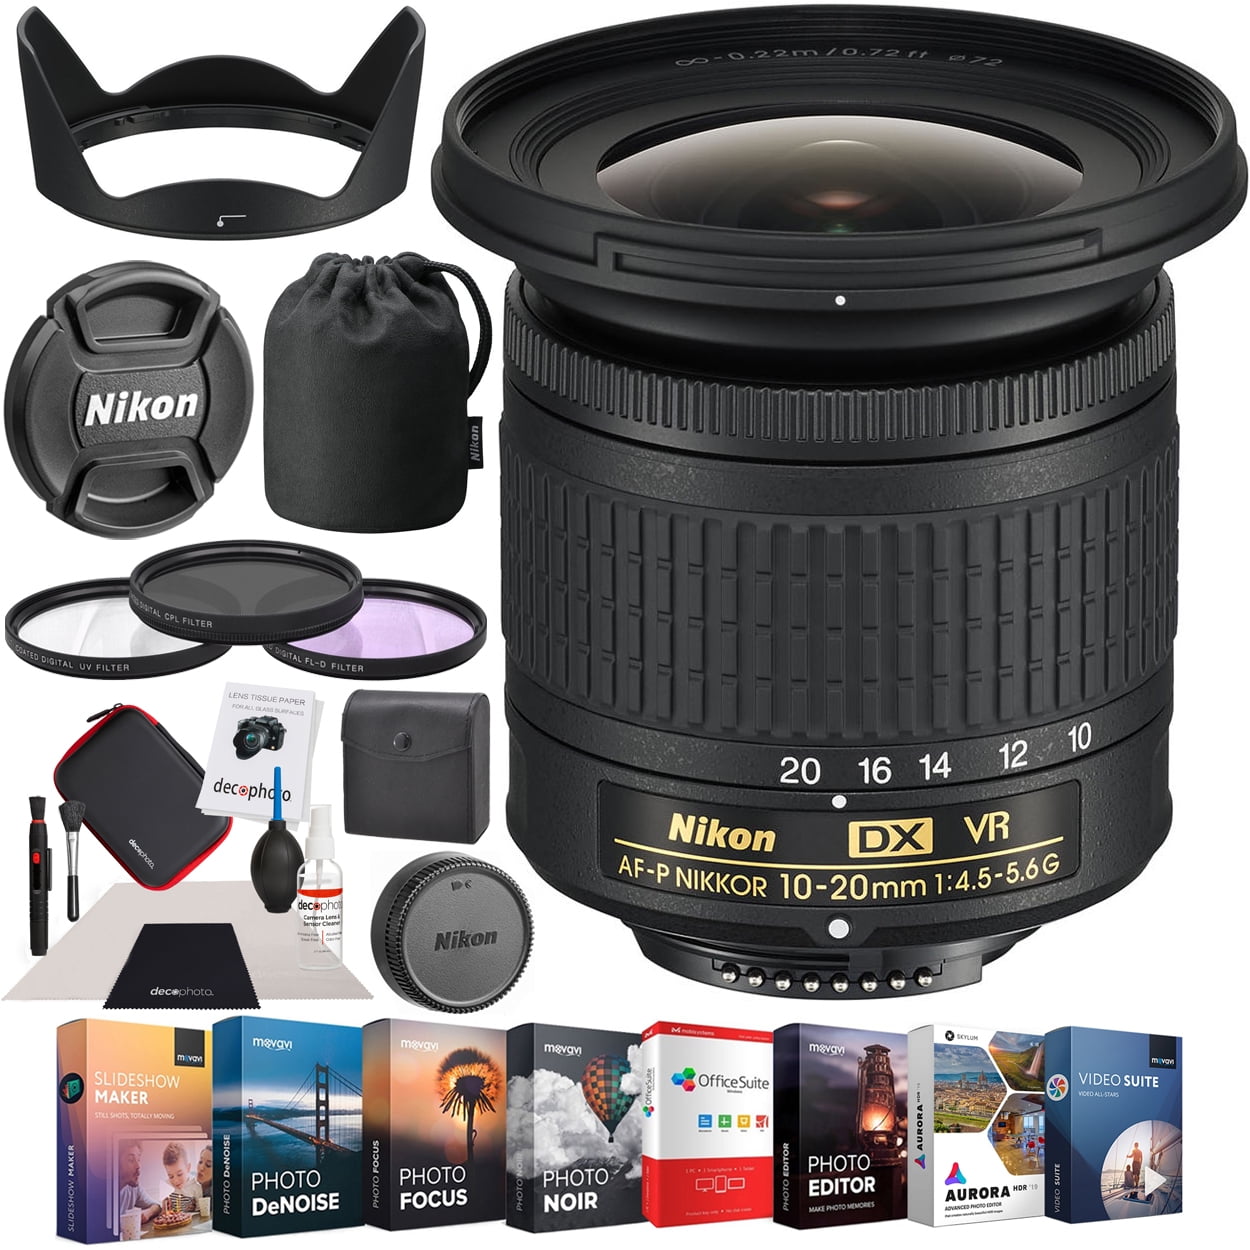 Nikon 067 Af P Dx Nikkor 10 mm F 4 5 5 6g Vr Lens Bundle With Photo And Video Professional Editing Suite 72mm Uv Polarizer Fld Deluxe Filter Kit And Cleaning Kit For Dslr Cameras